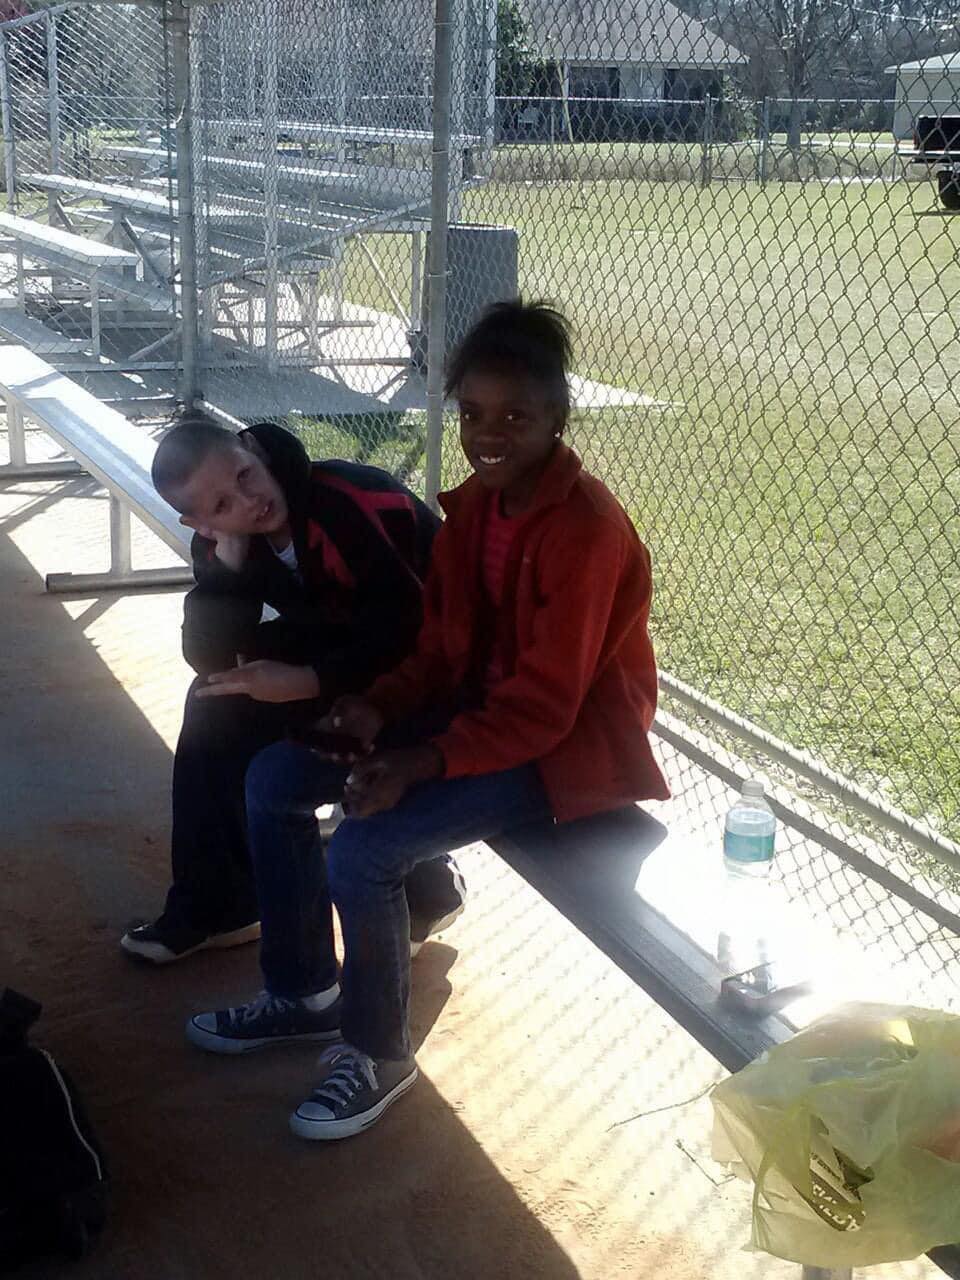 Logan Shubert, left, and Kennedy Sanders, right, sit on a bench in a softball dugout.